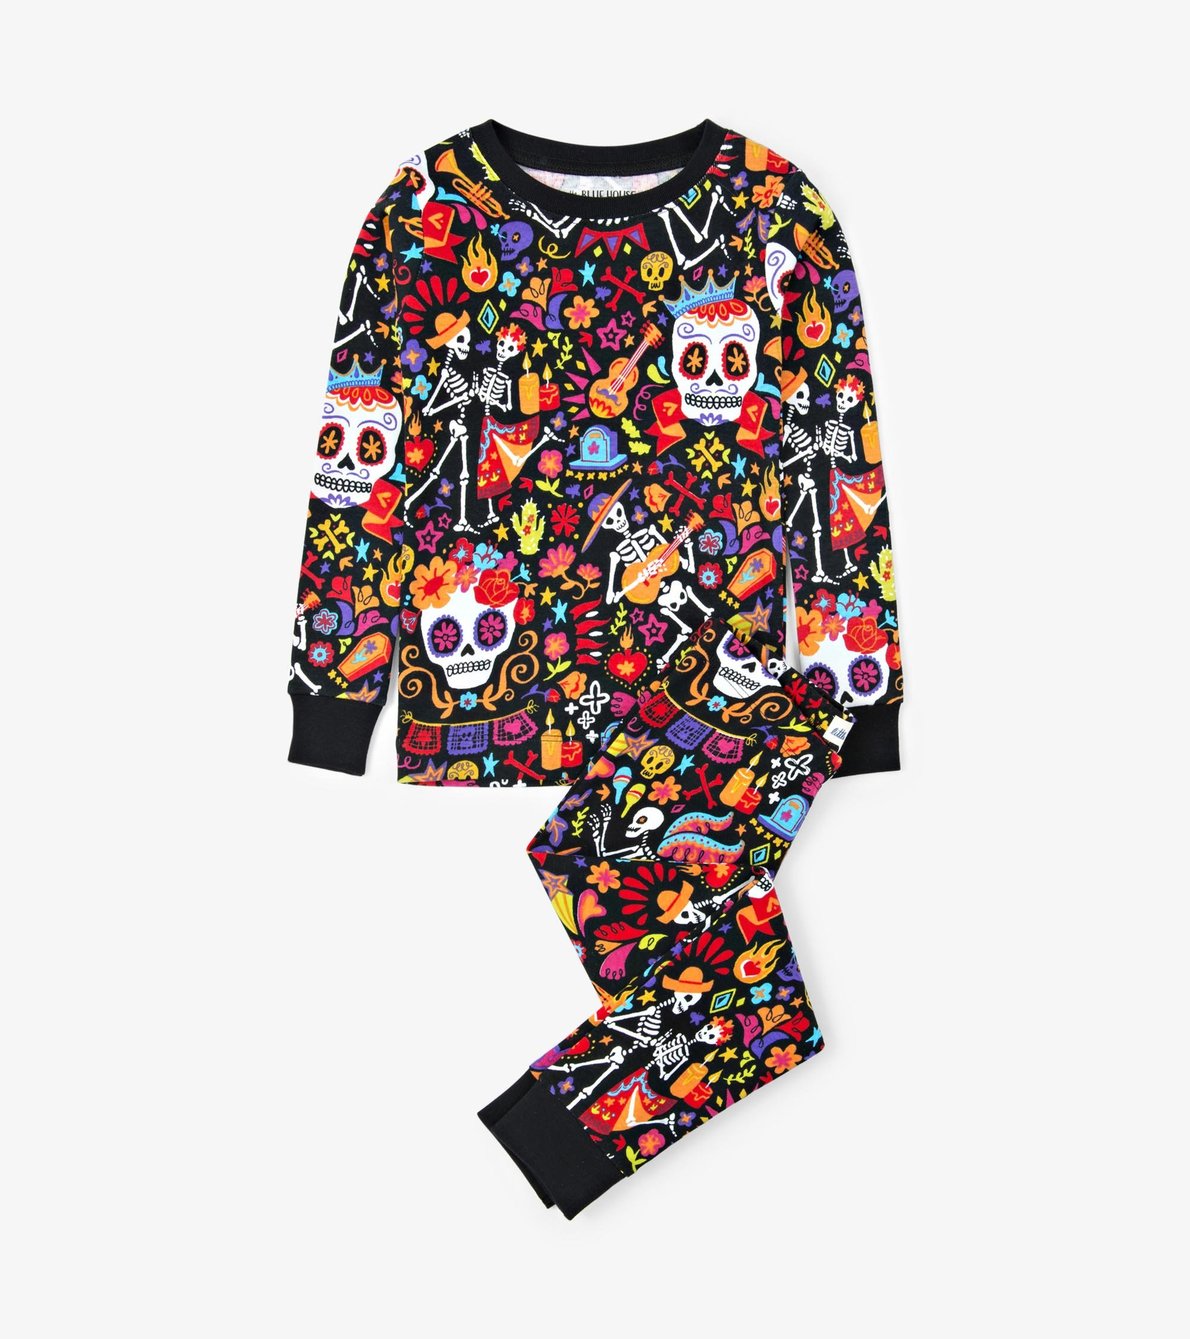 View larger image of "Day Of The Dead" Kids Pajama Set